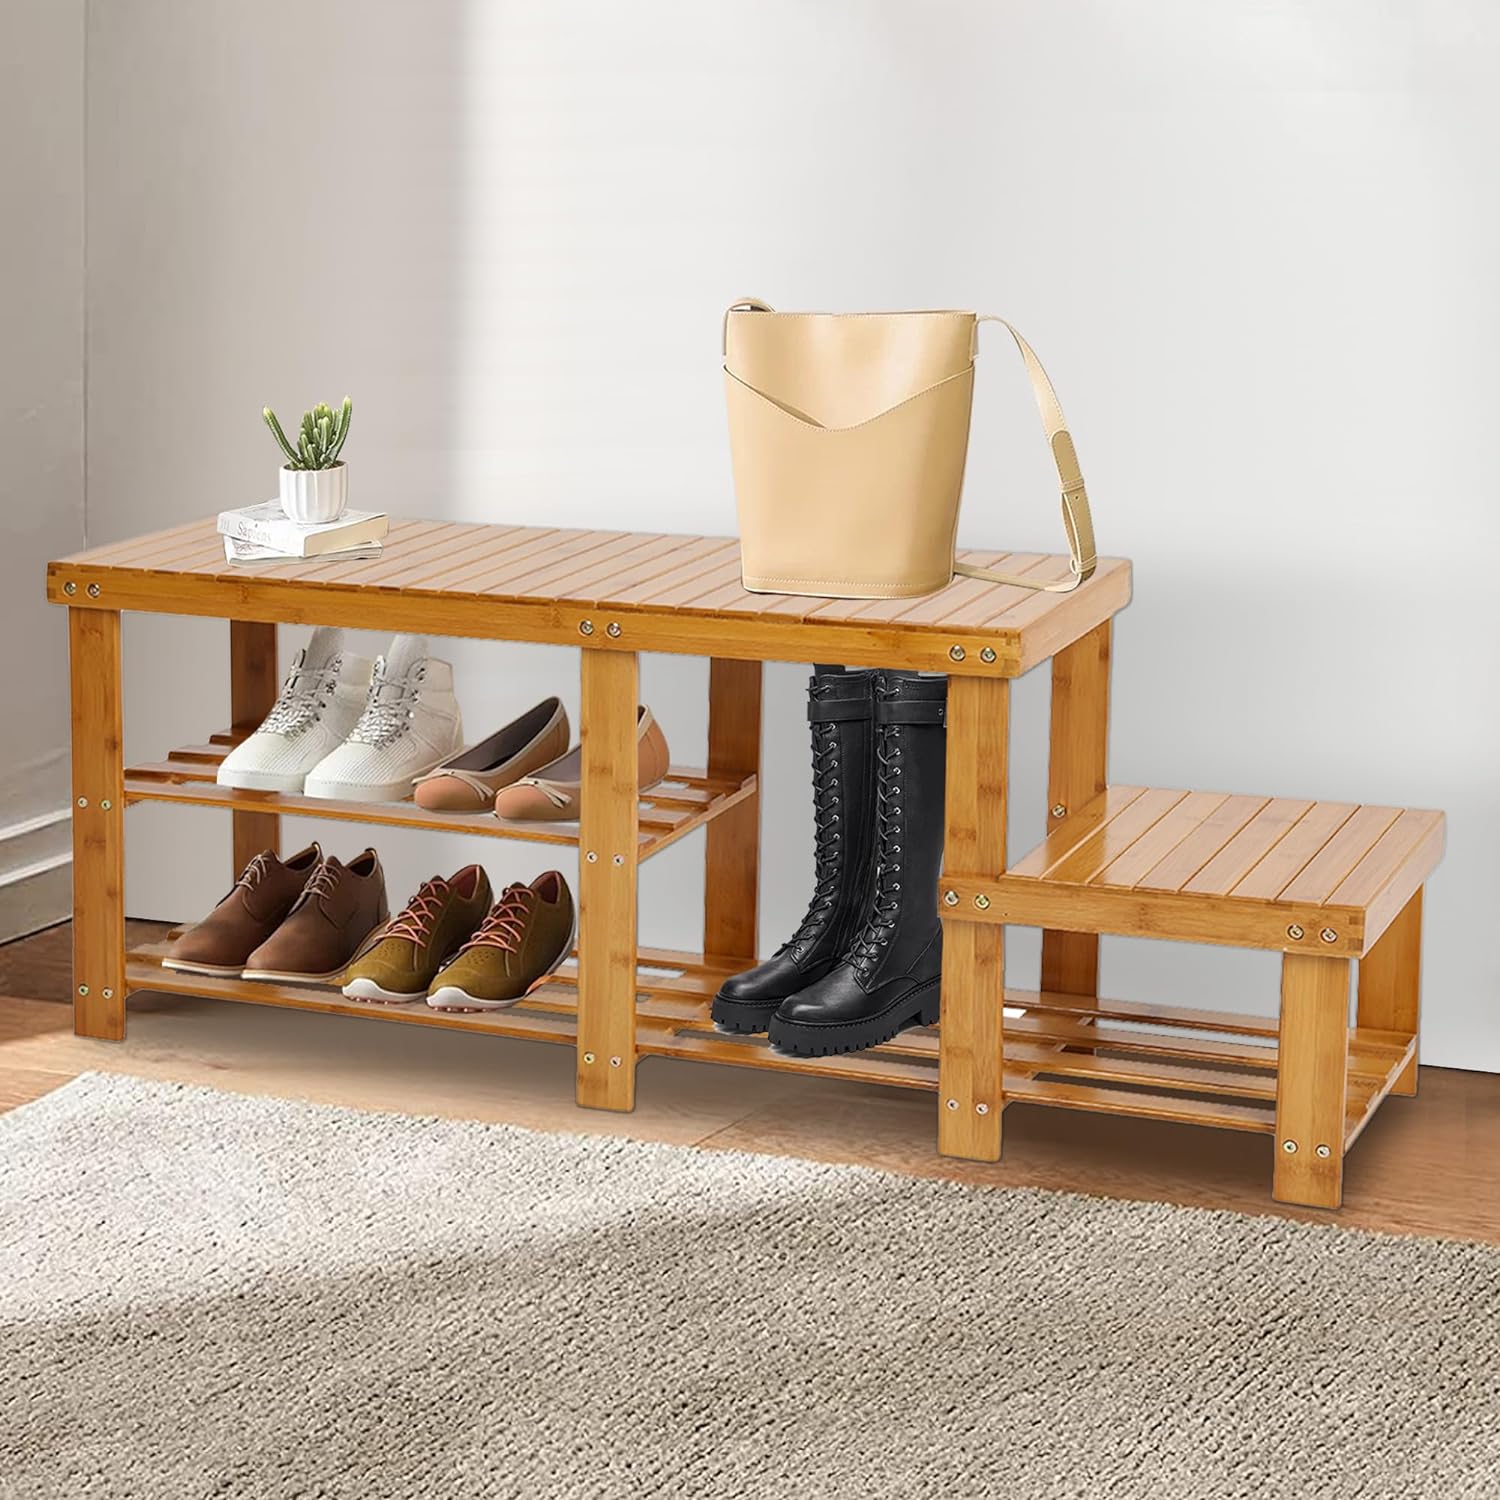 2-Tier Bamboo Shoe Rack Bench Entryway Functional Rack Shelf Plant Stand Storage Bench